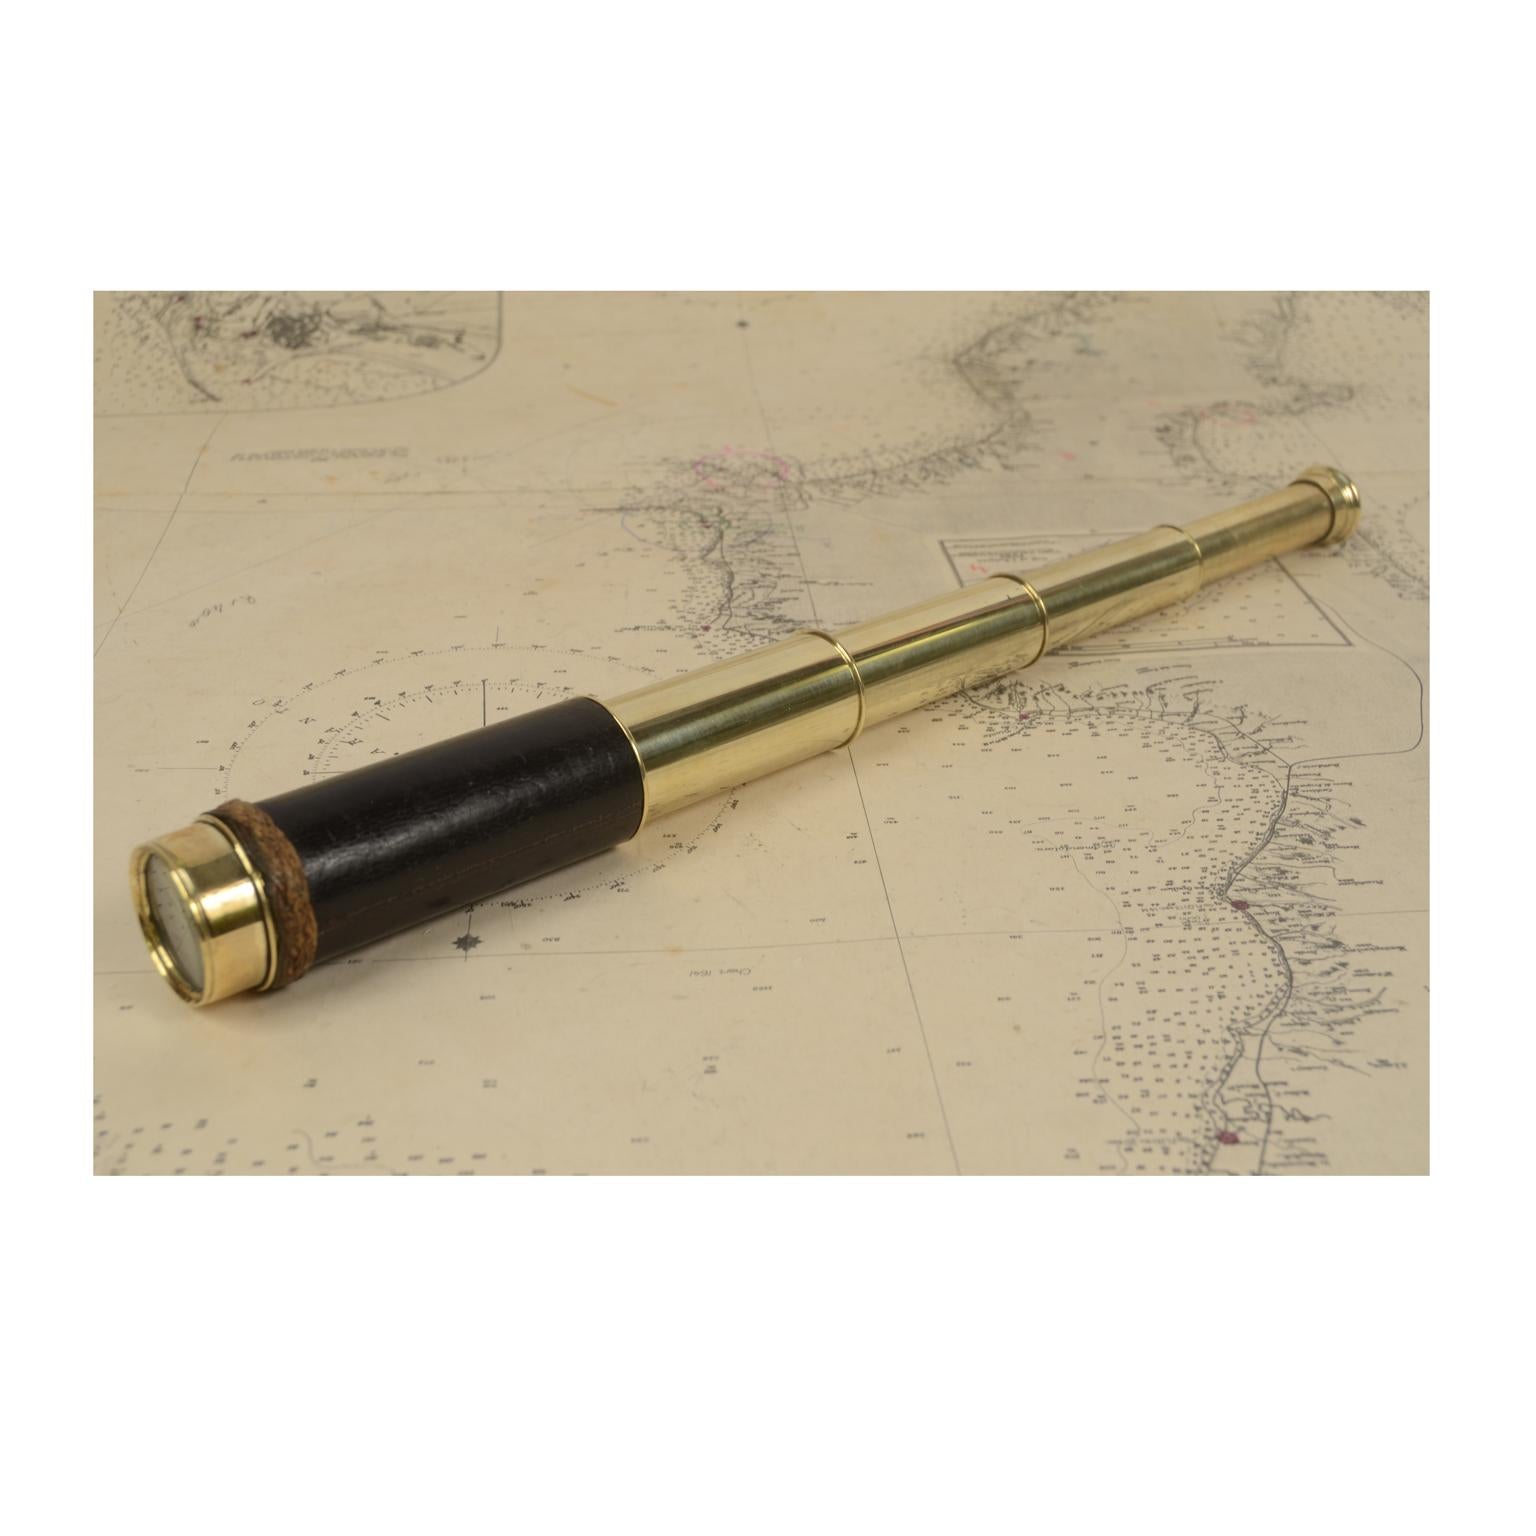 Brass telescope with leather-covered handle from the second half of the 19th century. Four-extension focus. Maximum length 39 cm - 15.35 inches, minimum 12 cm - 4.72 inches, focal diameter 3 cm - 1.18 inches. Excellent condition, fully functional,